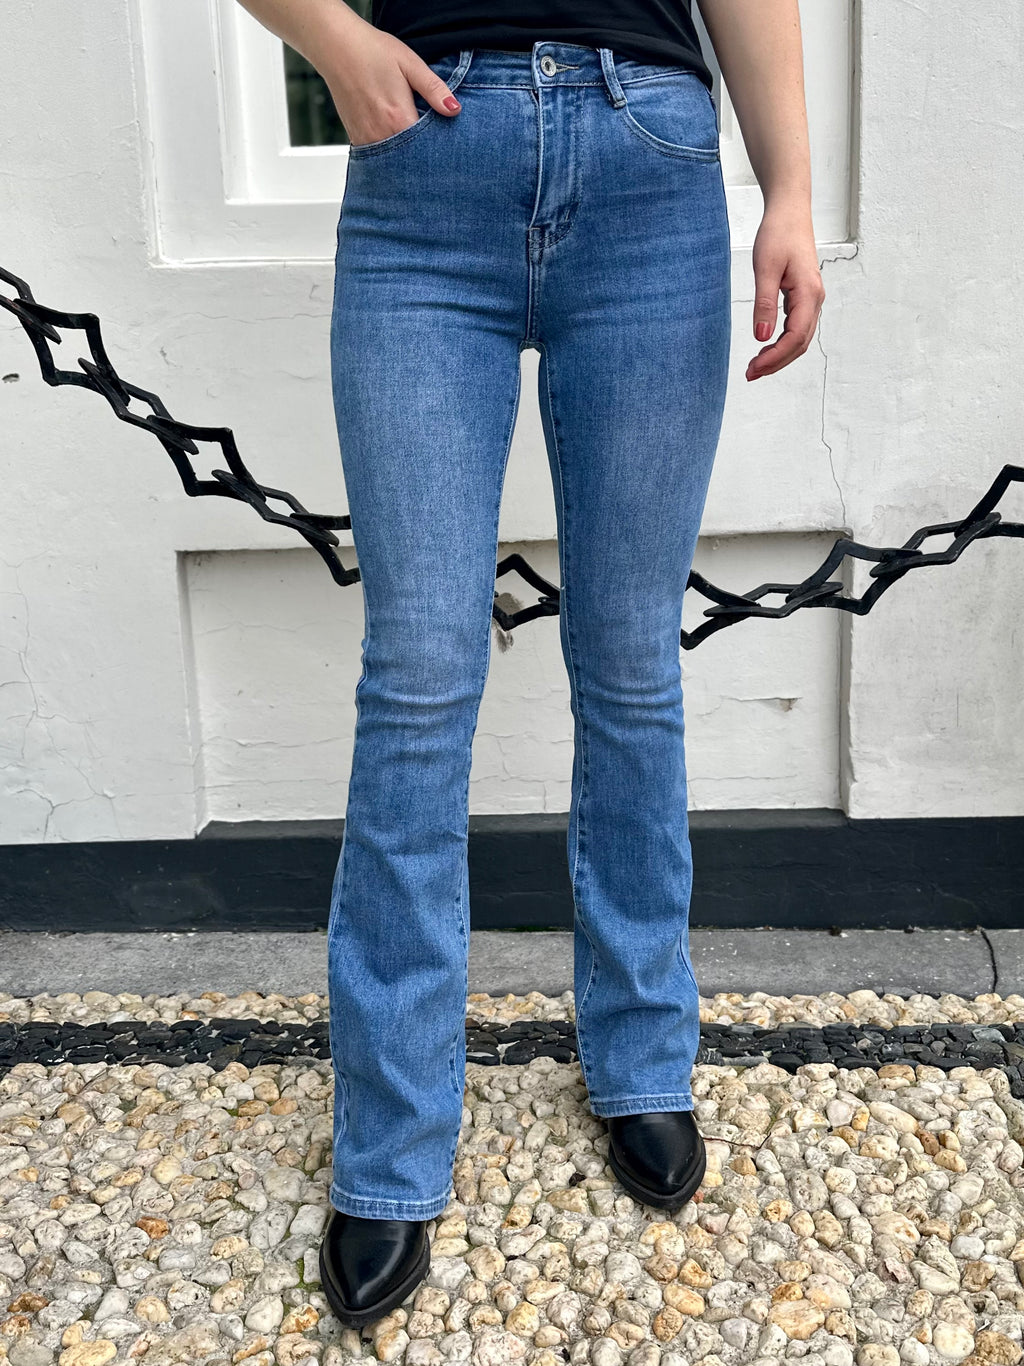 HELLO MISS FLARED JEANS MID BLUE